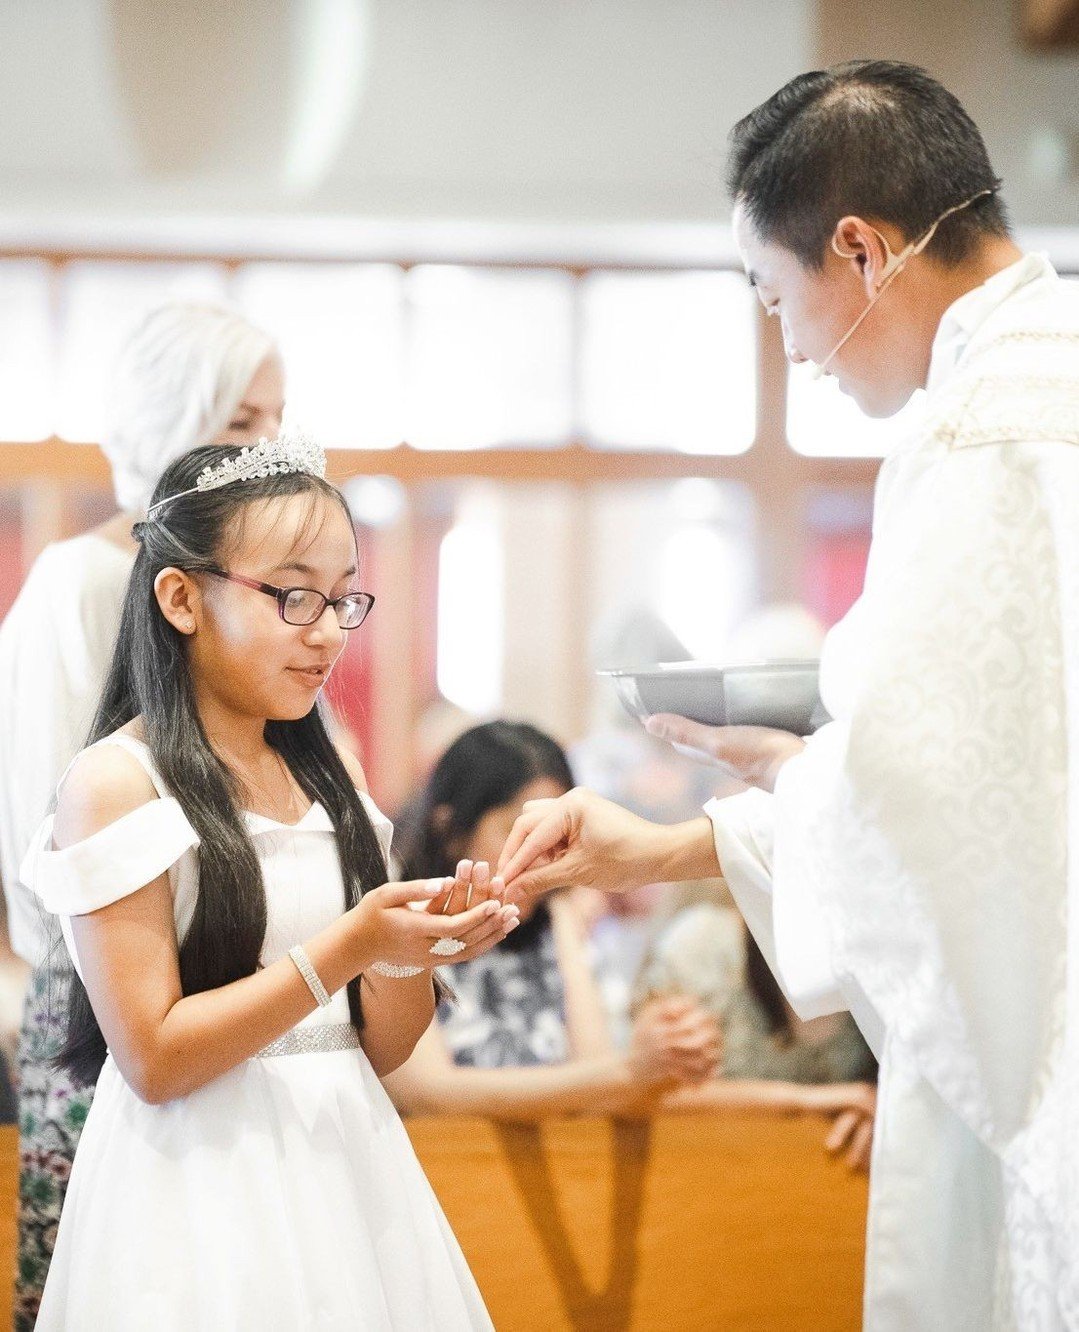 Over this past weekend, 91 kids received the Holy Eucharist for the first time at Solano! Congratulations to all our communicants! Please continue to pray for our young church!⁠
⁠
Layla Alvarnas, Andrew Arteaga, Carlo Askari, Paulo Askari, Lacey Bald